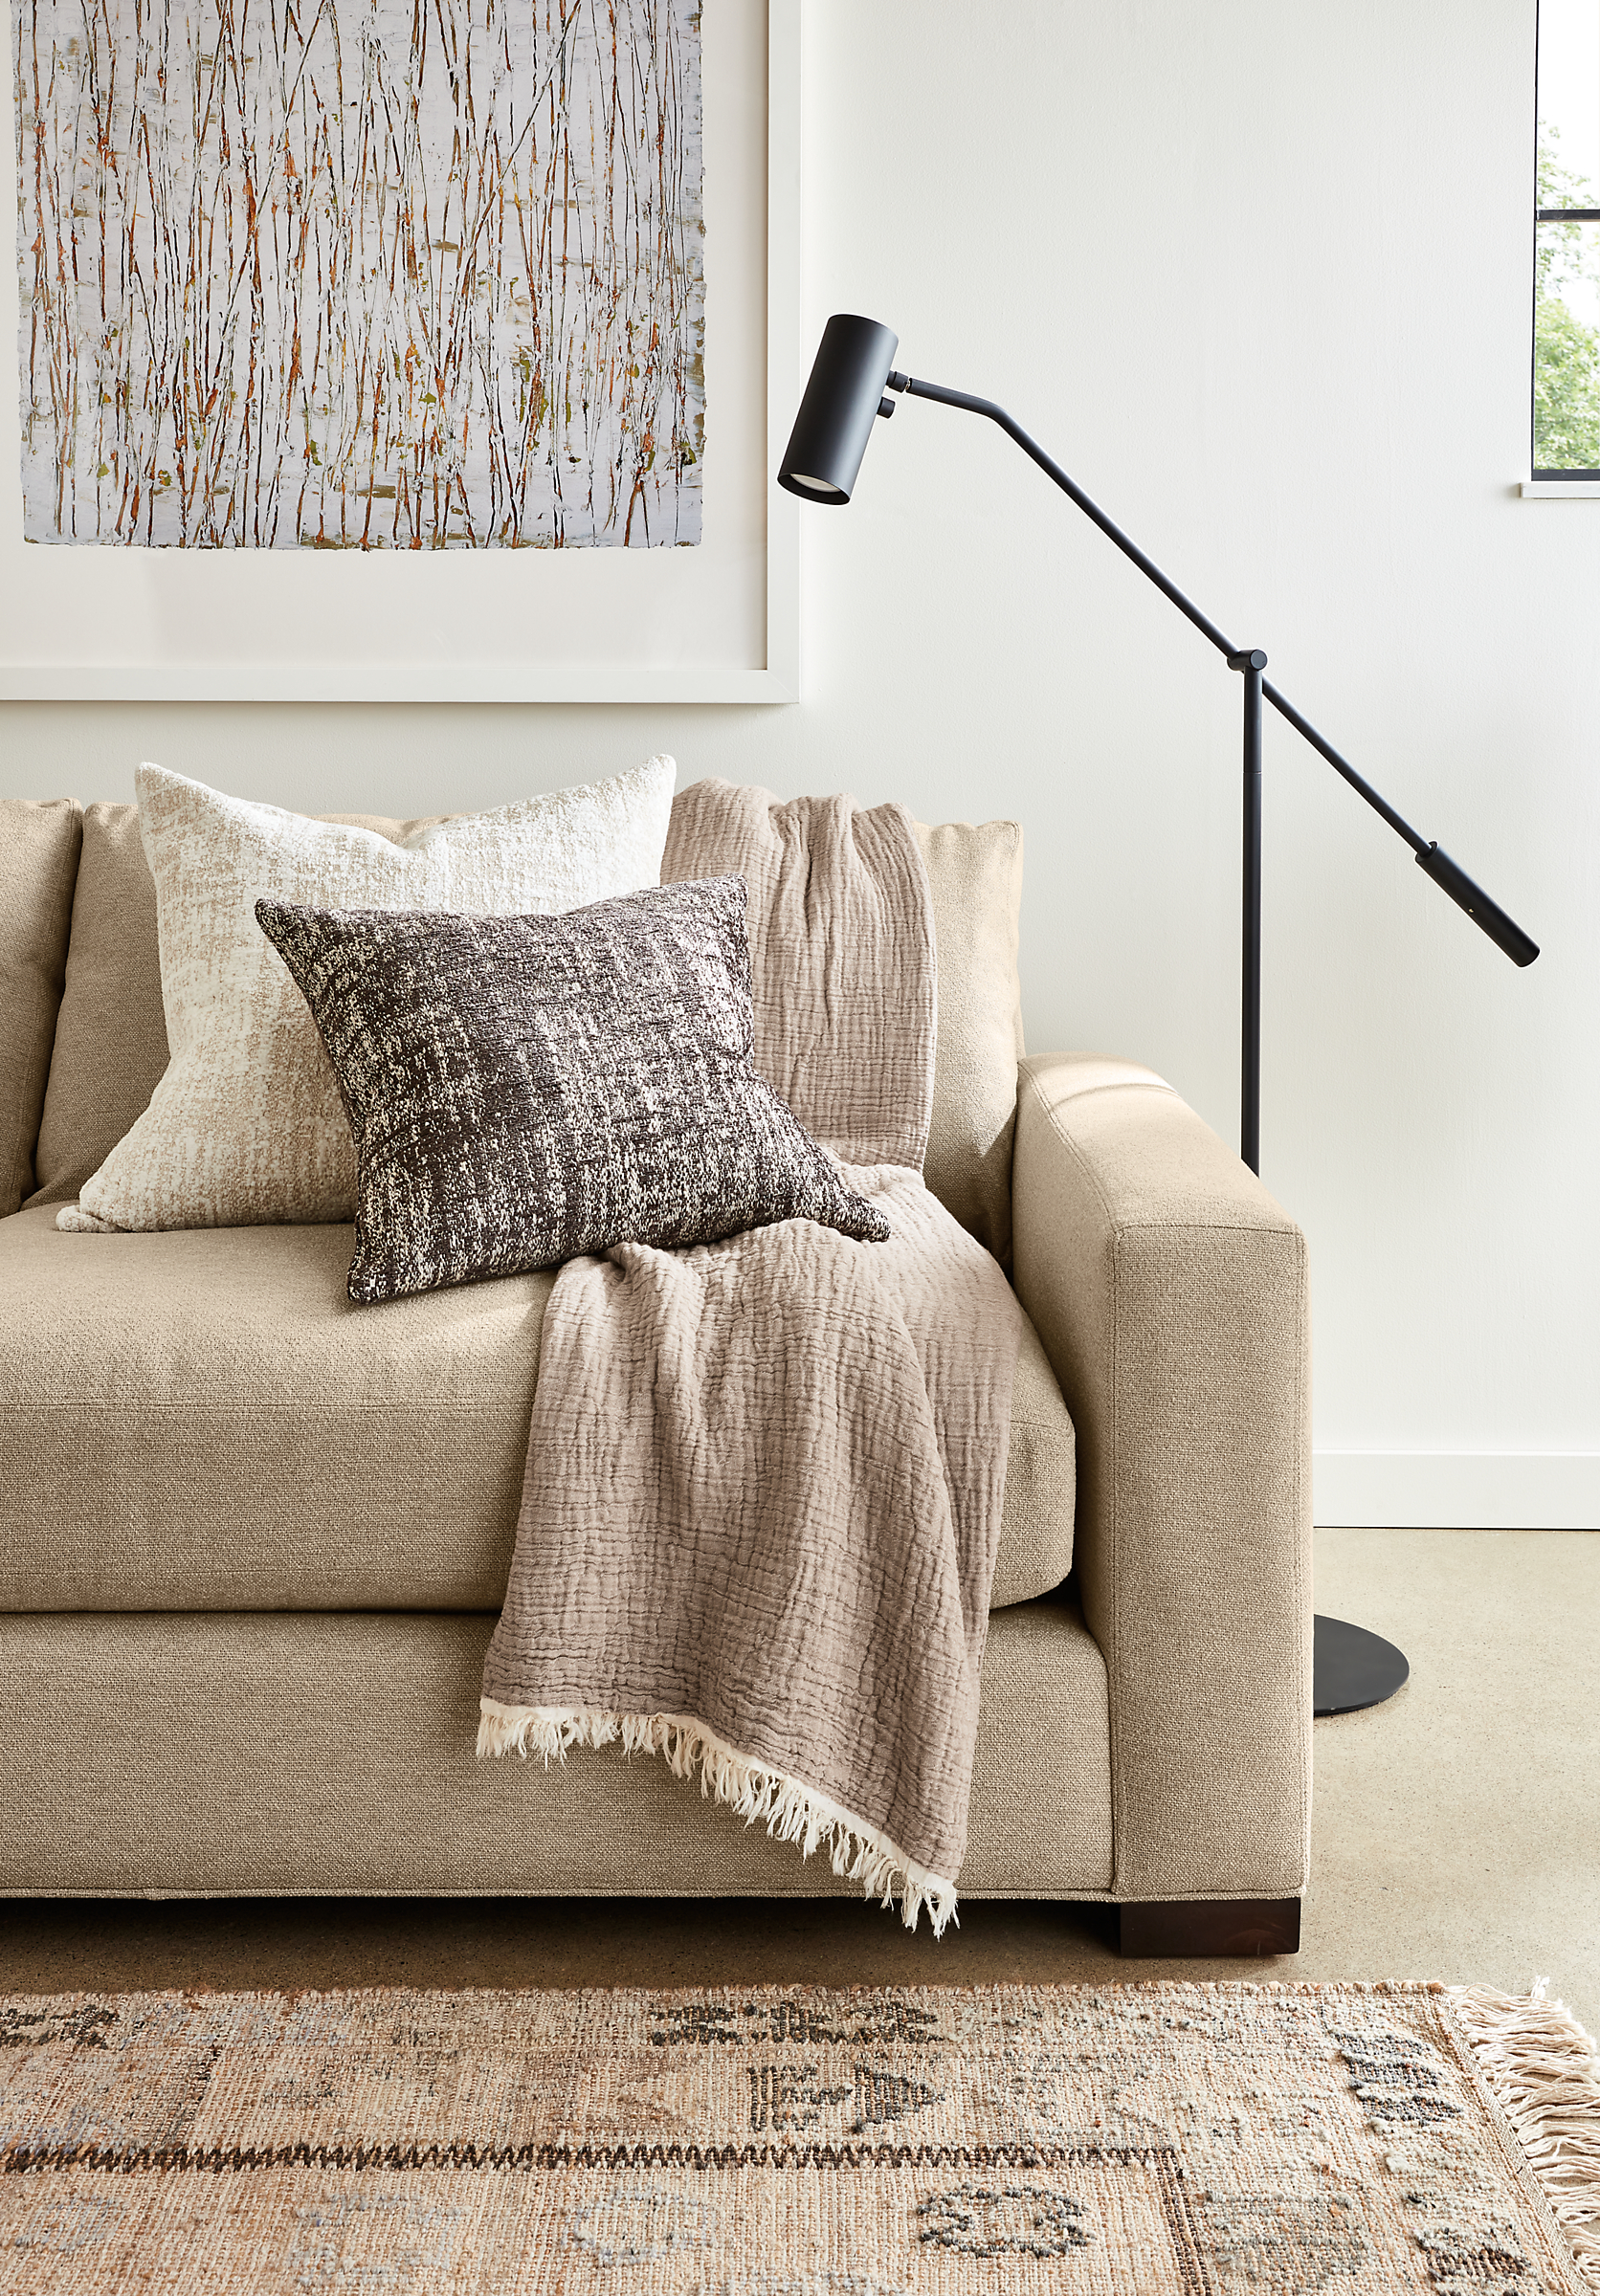 Close-up of Metro Deep 98-wide Sofa in Tatum Fabric with Lisi Throw in Sand and 2 Briget throw pillows.